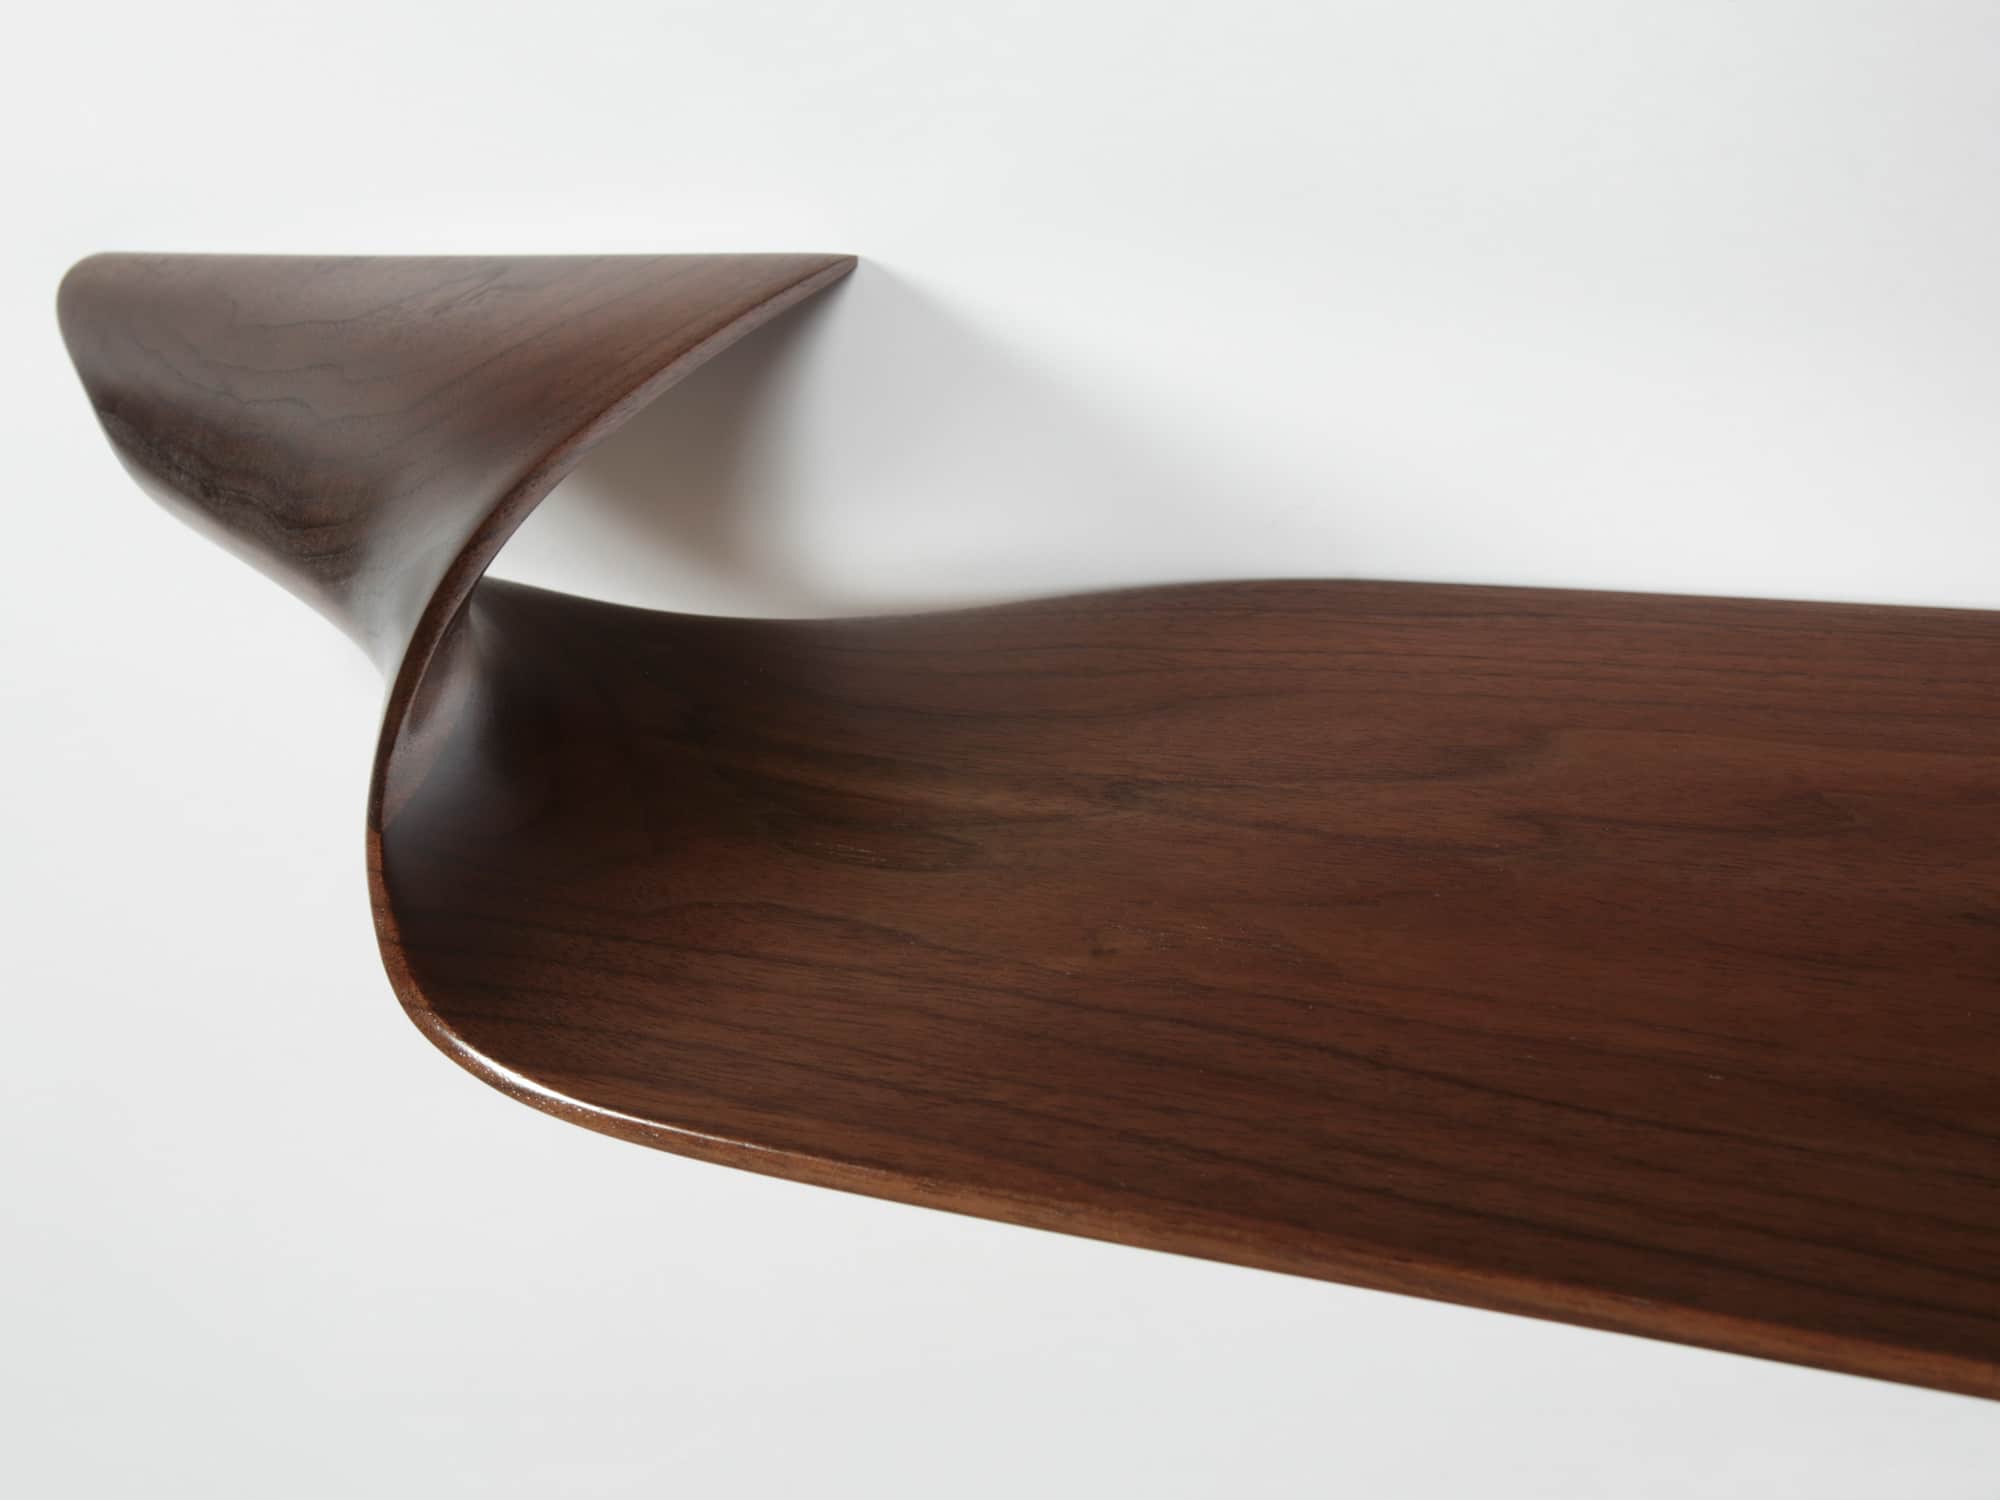 This image shows a detail of the end carving of the site specific CE16 Triple Twist Shelf in a walnut finish designed by Carol Egan.  The dimensions of the piece are 5.5"h x 64/58"w x 12"d (14 x 162/148 x 30cm). View Detail of end carving, wall-mounted and cantilevered around a corner.